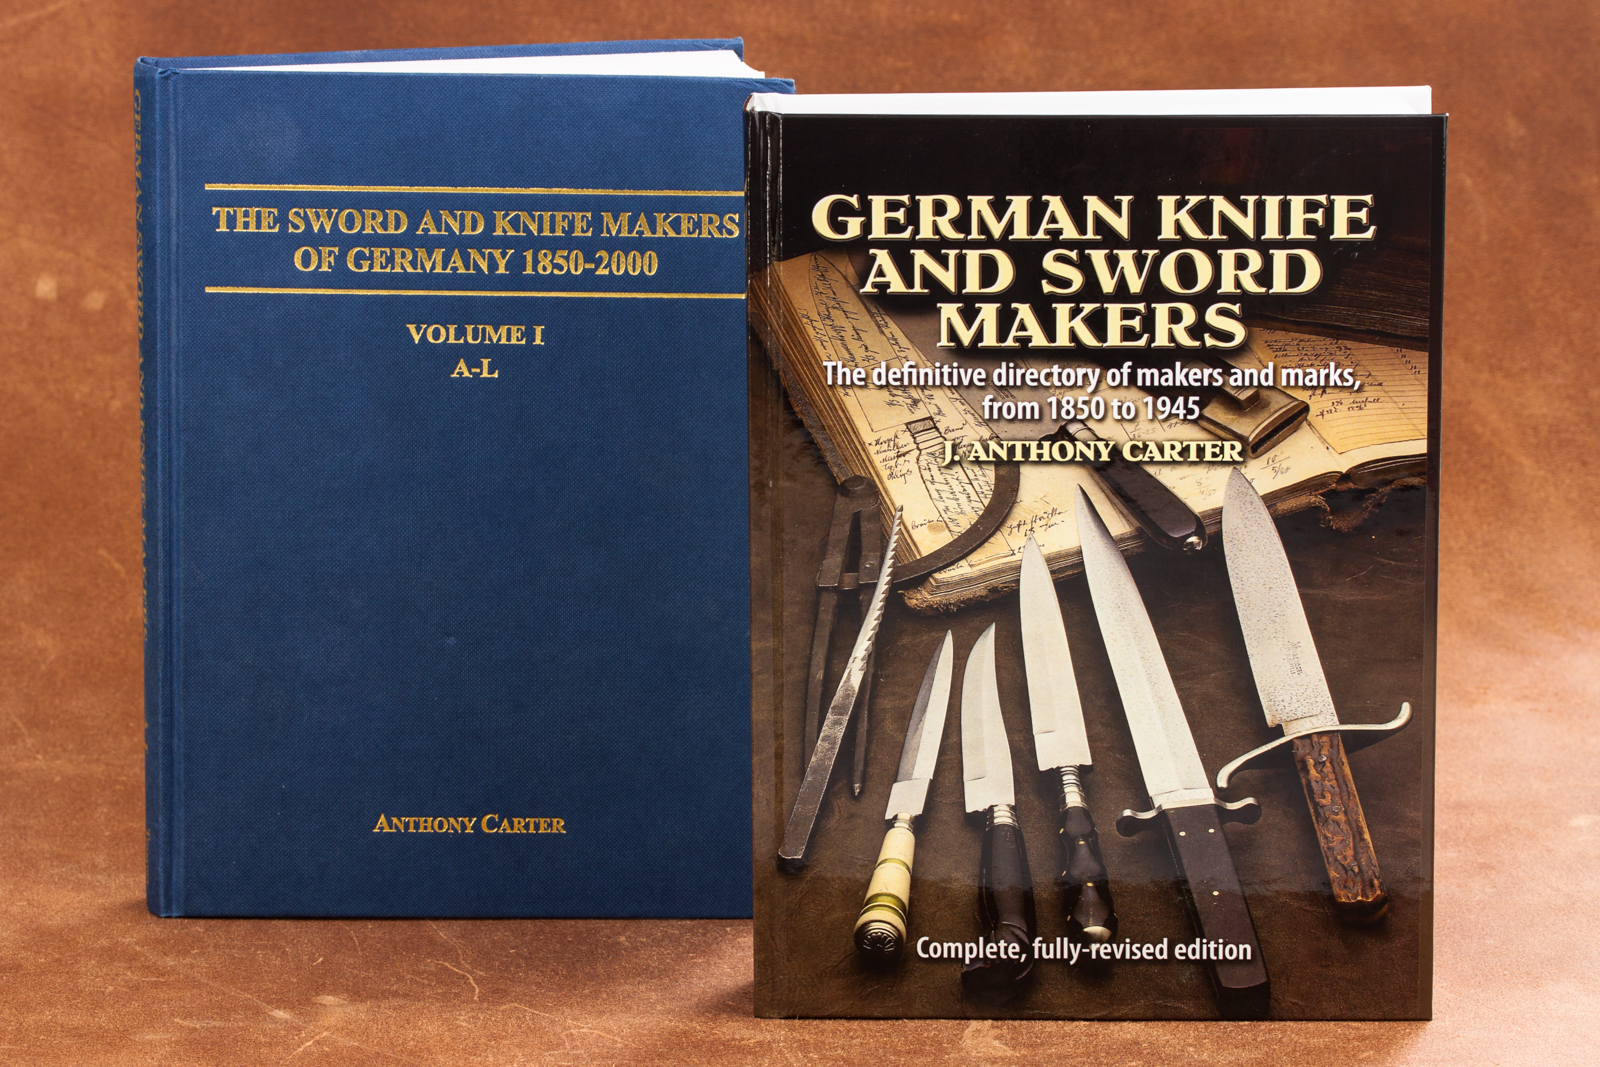 German Knife and Sword Makers by J. Anthony Carter- Makers A to Z